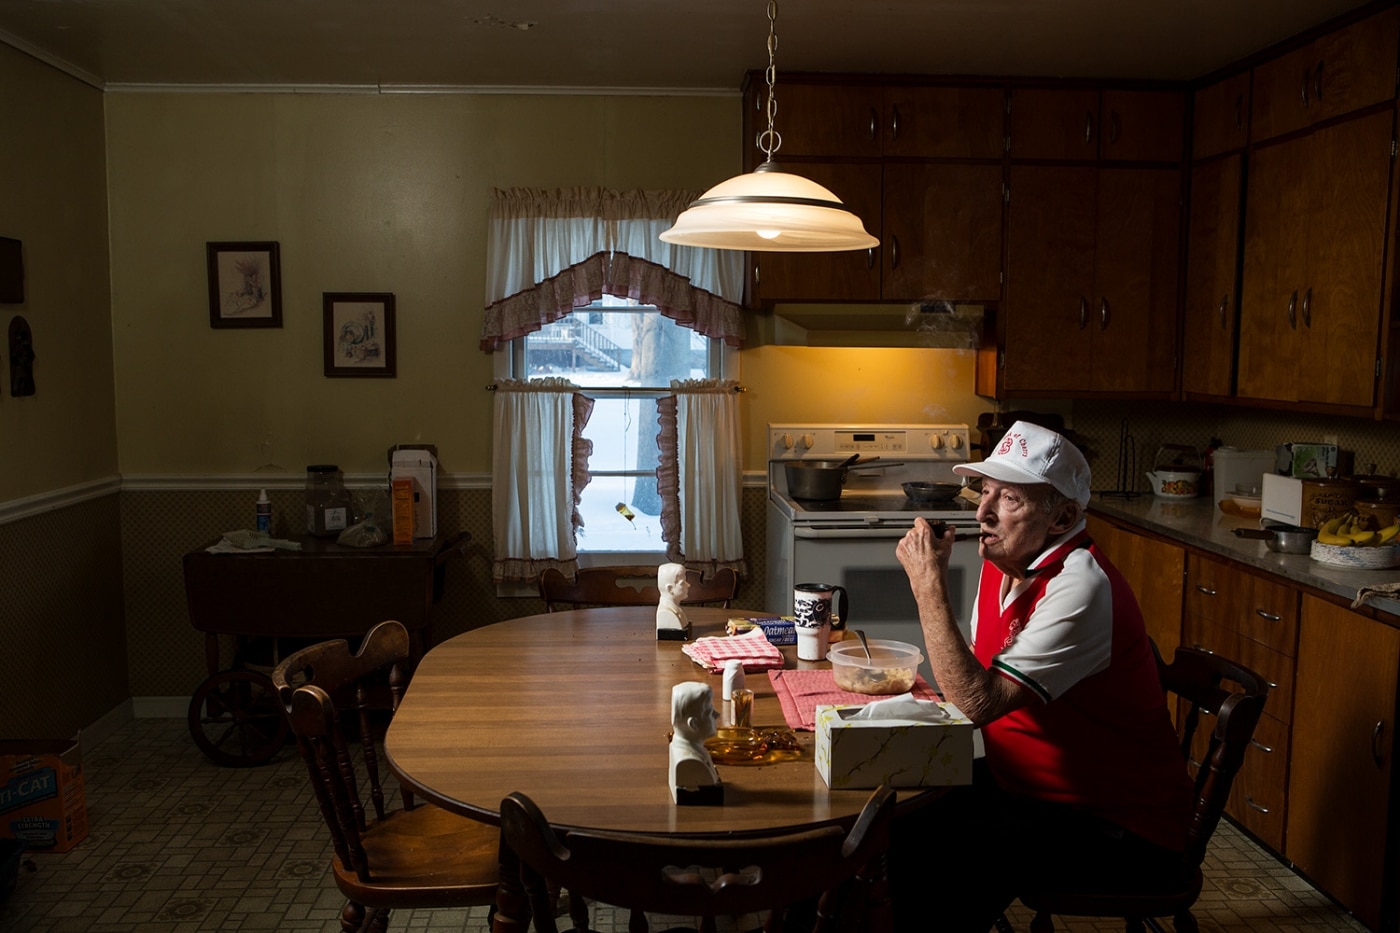 Fascinating Photos Document the Ritual of Weeknight Dinners